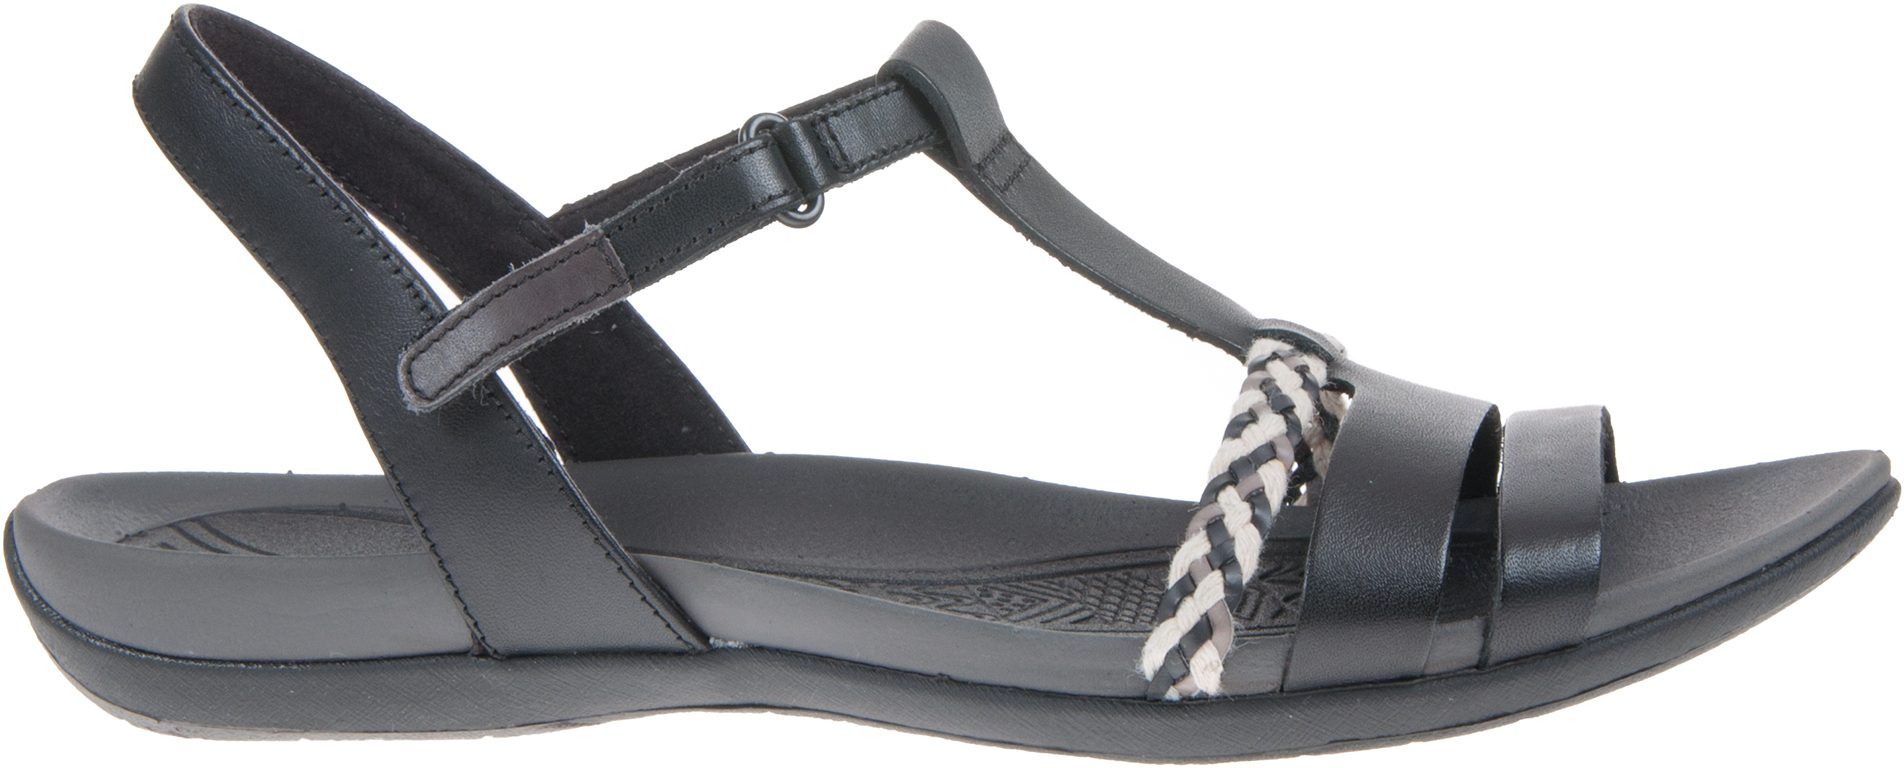 Clarks Tealite Grace Black Leather 26124583 - Full Sandals - Humphries ...